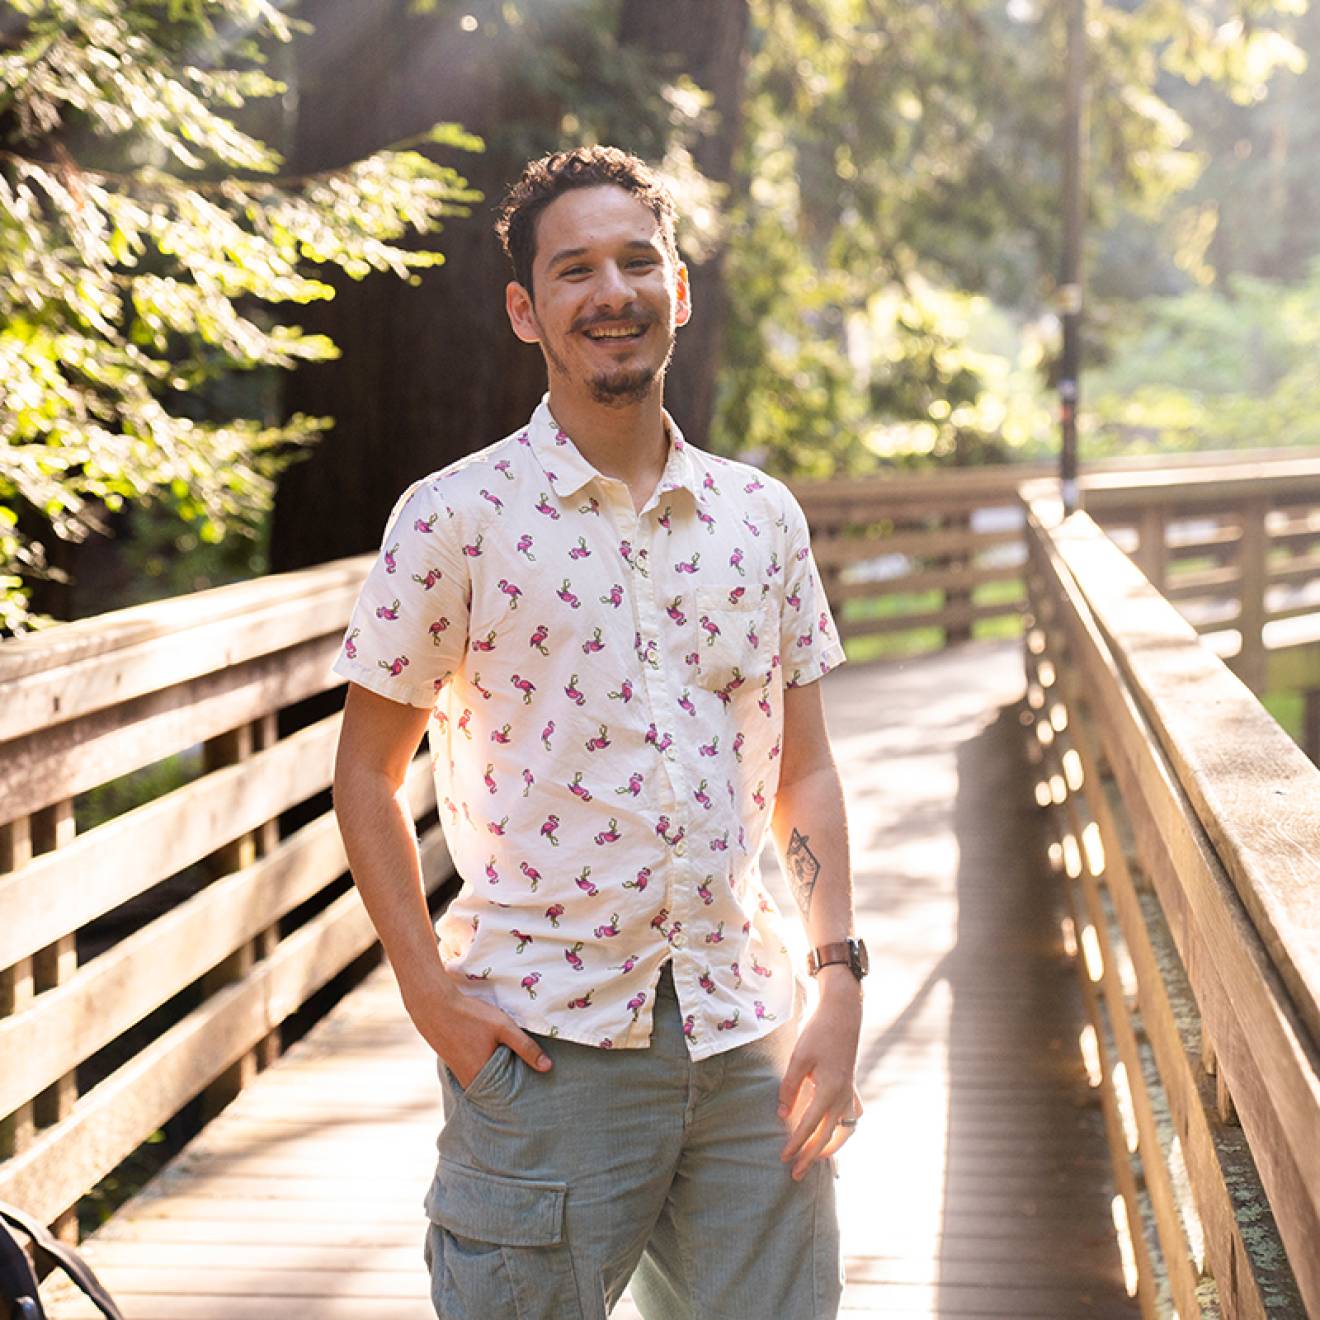 A smiling young man standing on a bridge surrounded by redwood trees